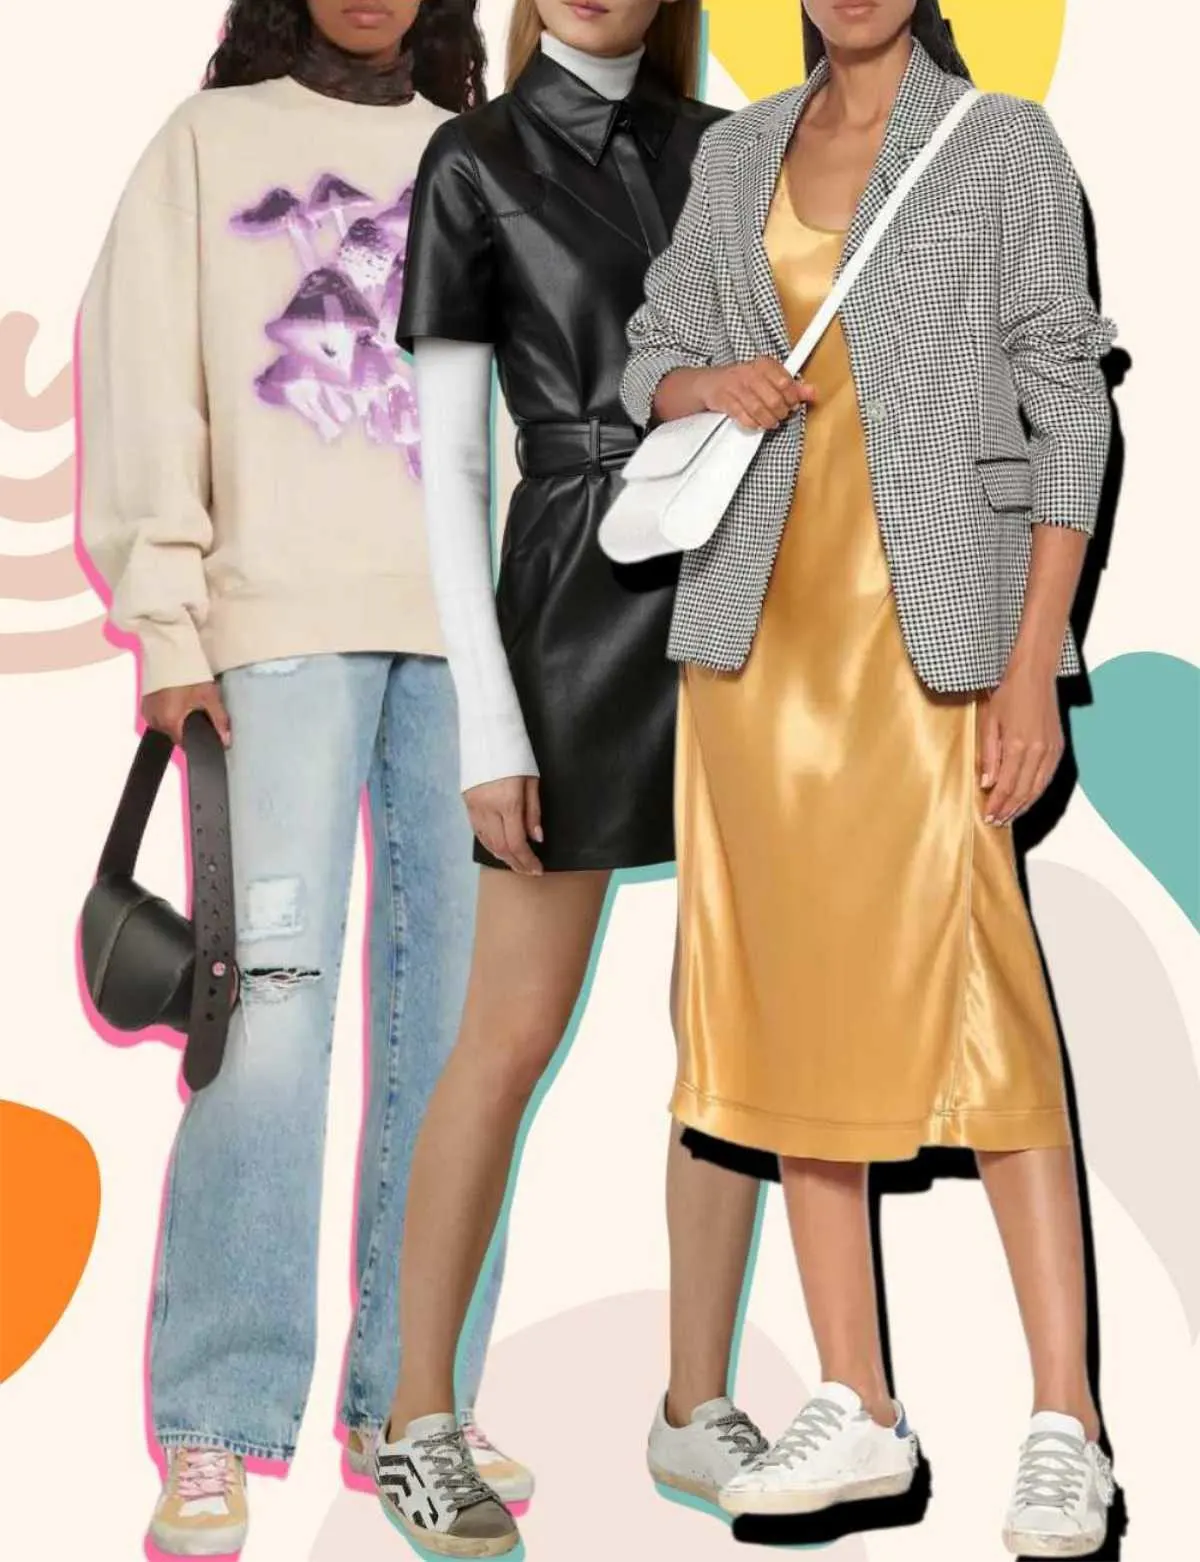 Collage of 3 women wearing different Golden Goose sneakers outfits.